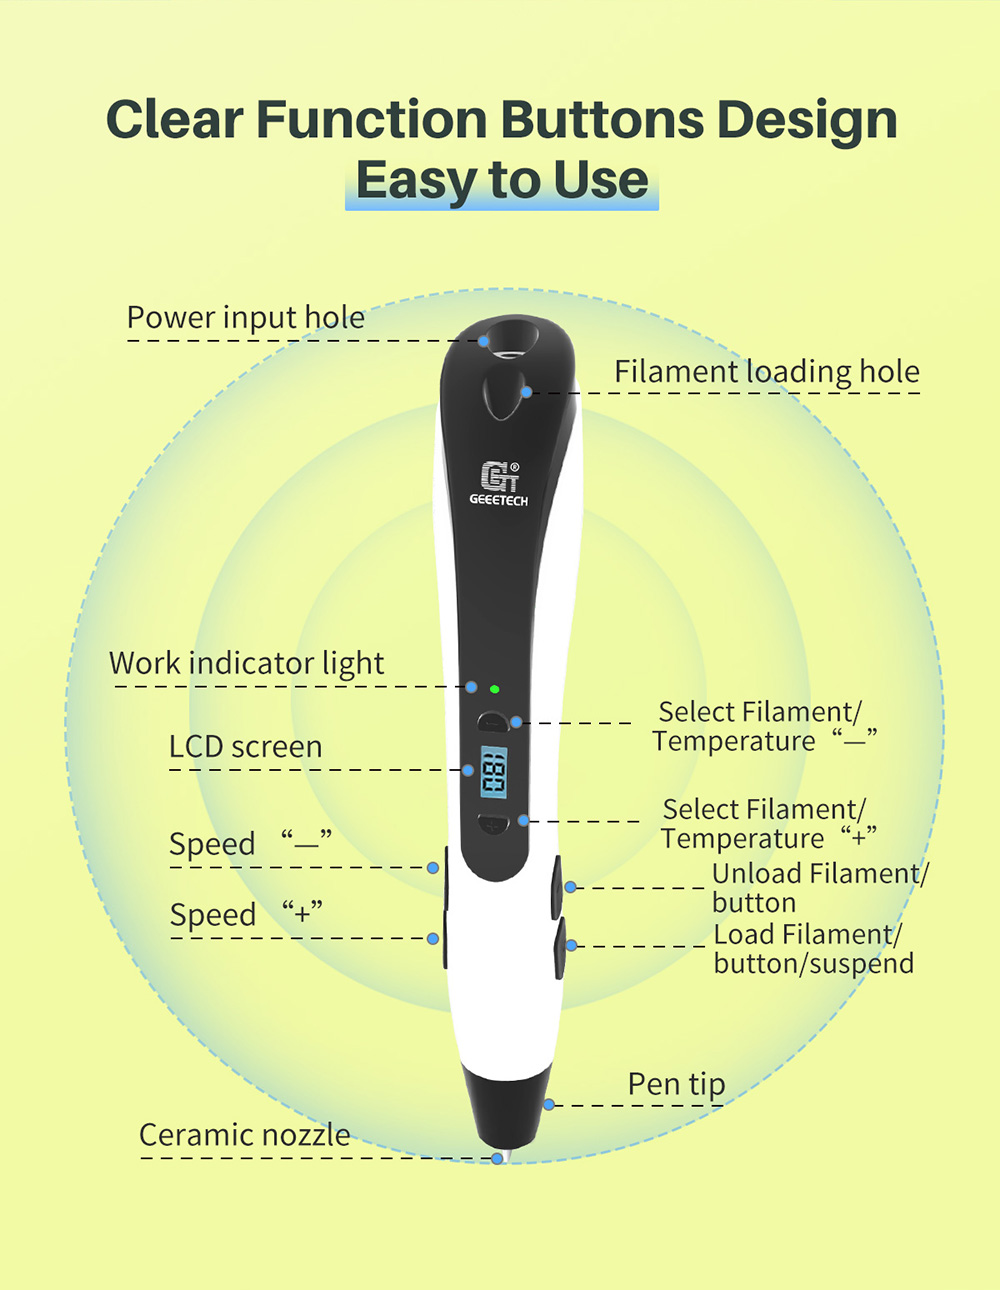 geeetech Black TG-21 3D Printing Pen description of easy to use